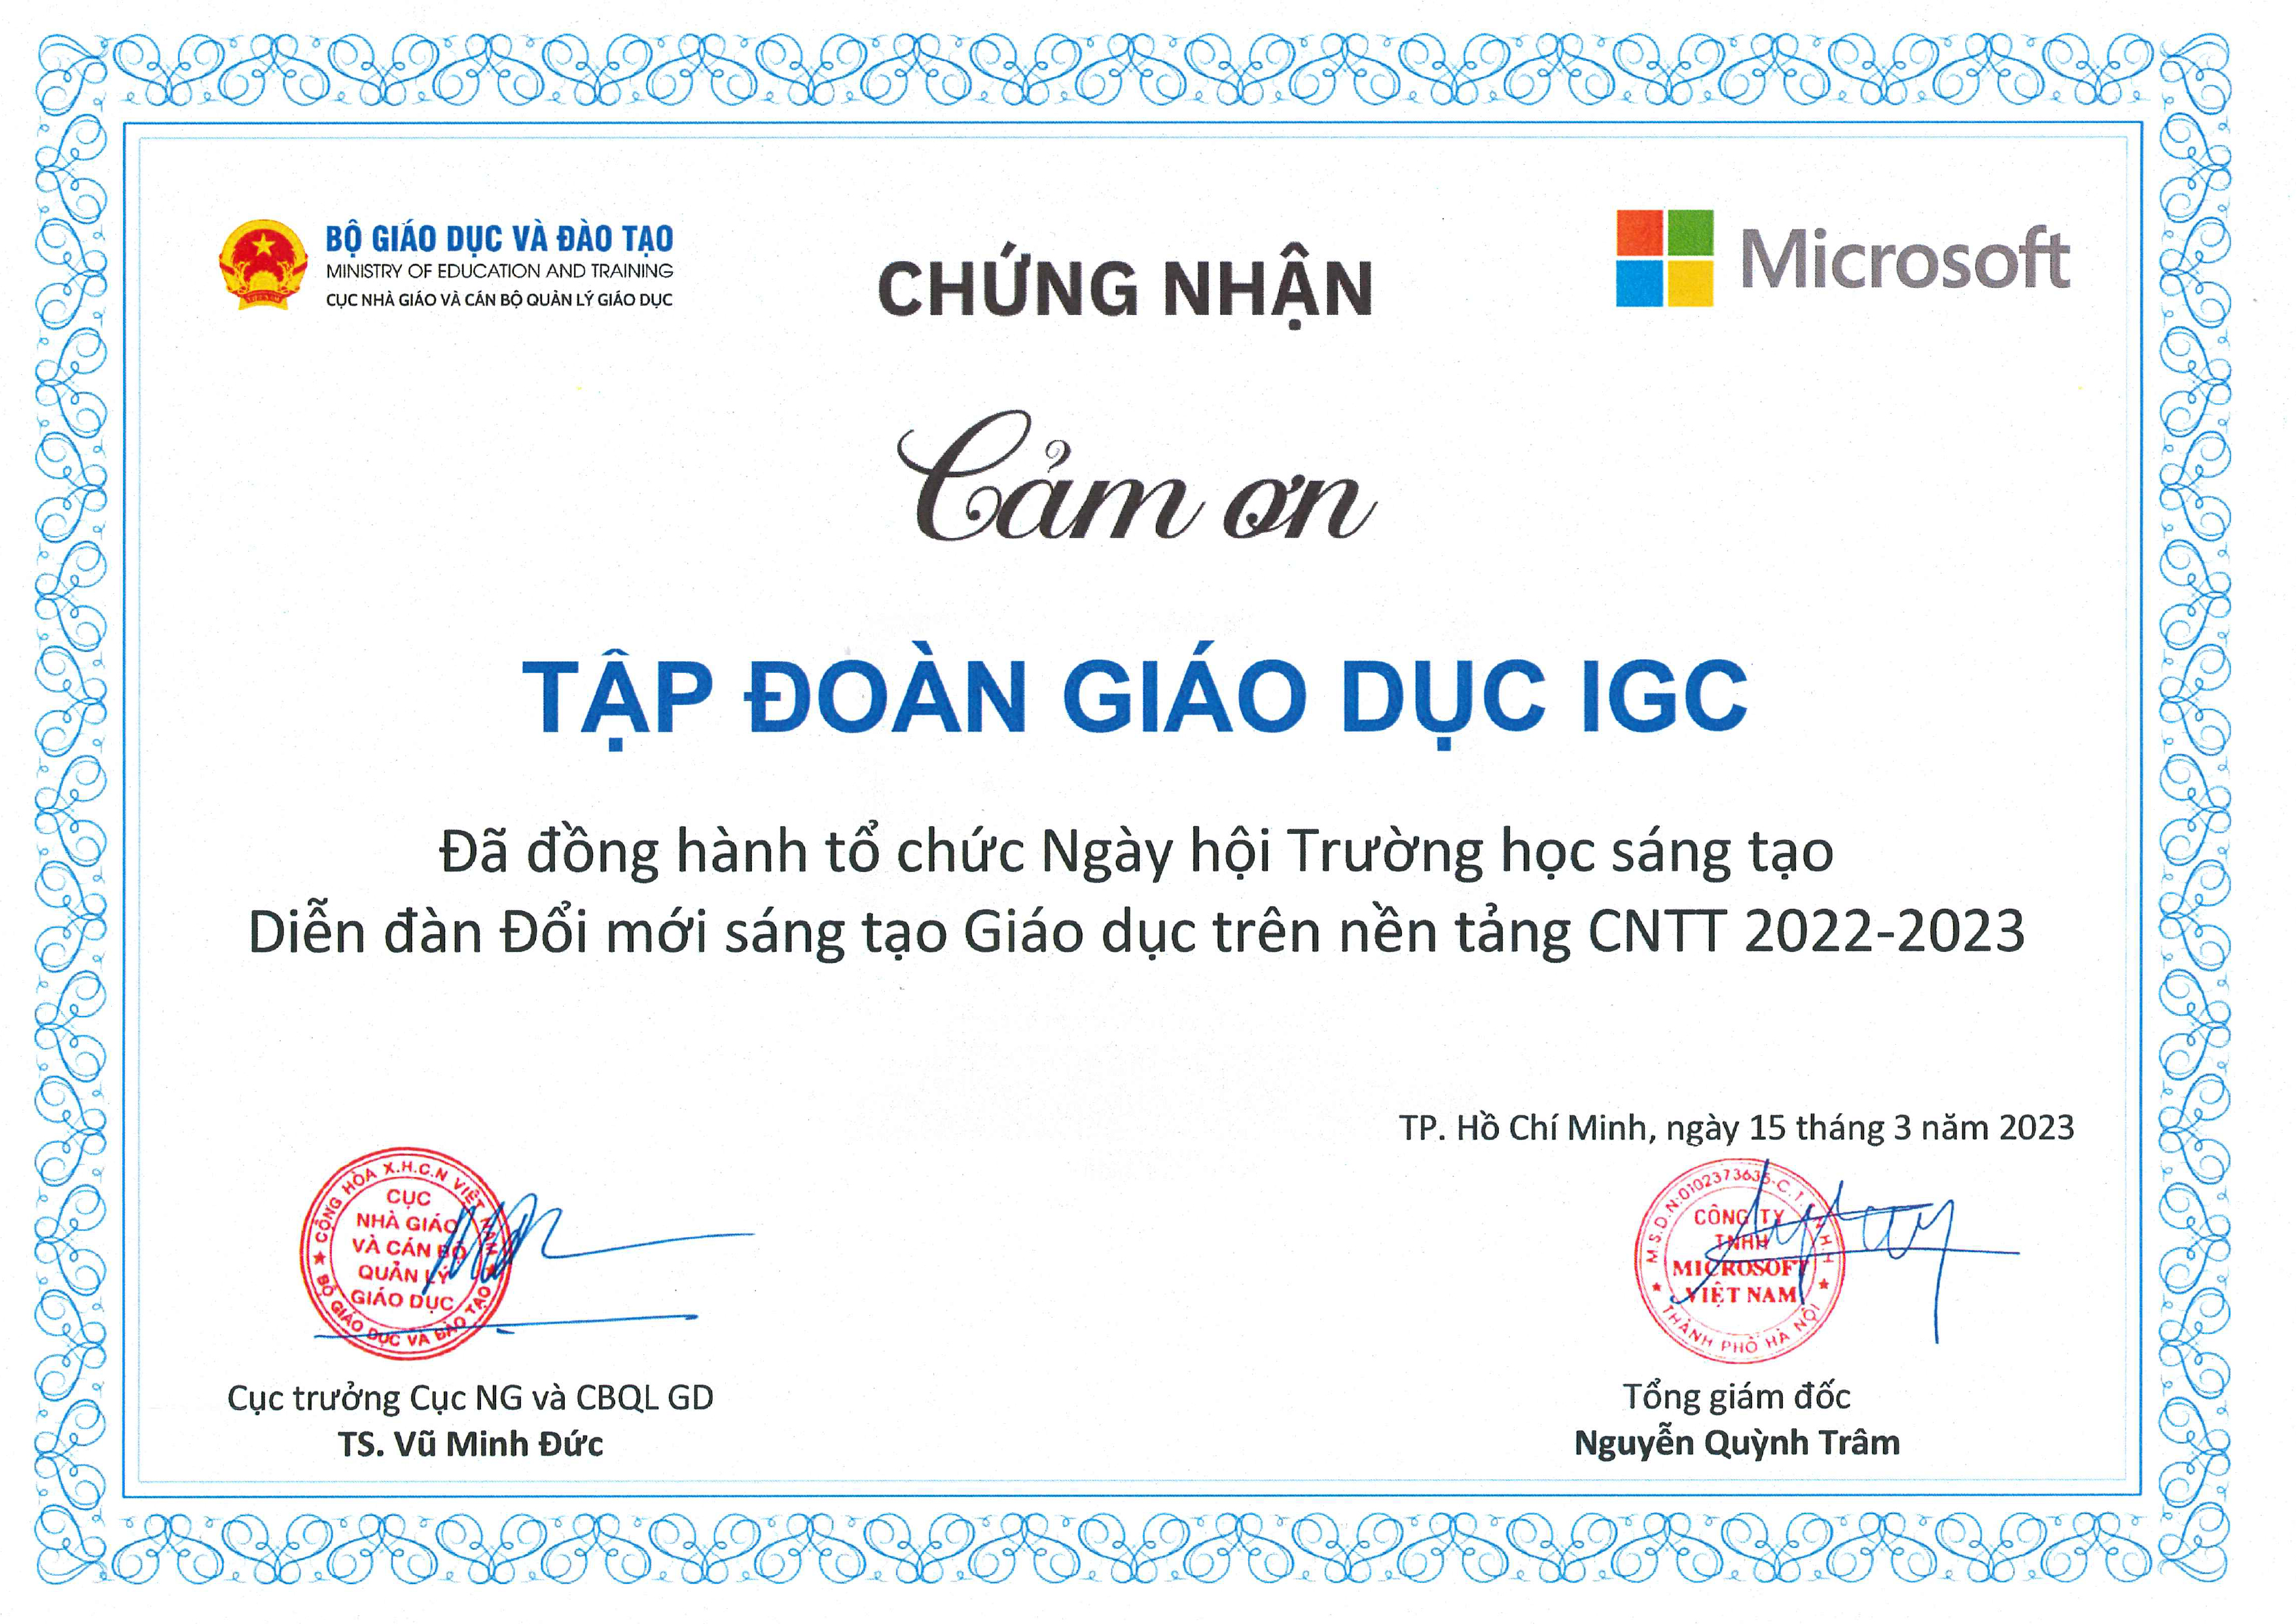 IGC partners with the DOET of Dong Nai province and Microsoft to organize the Creative School Day - E2 Vietnam 2022-2023